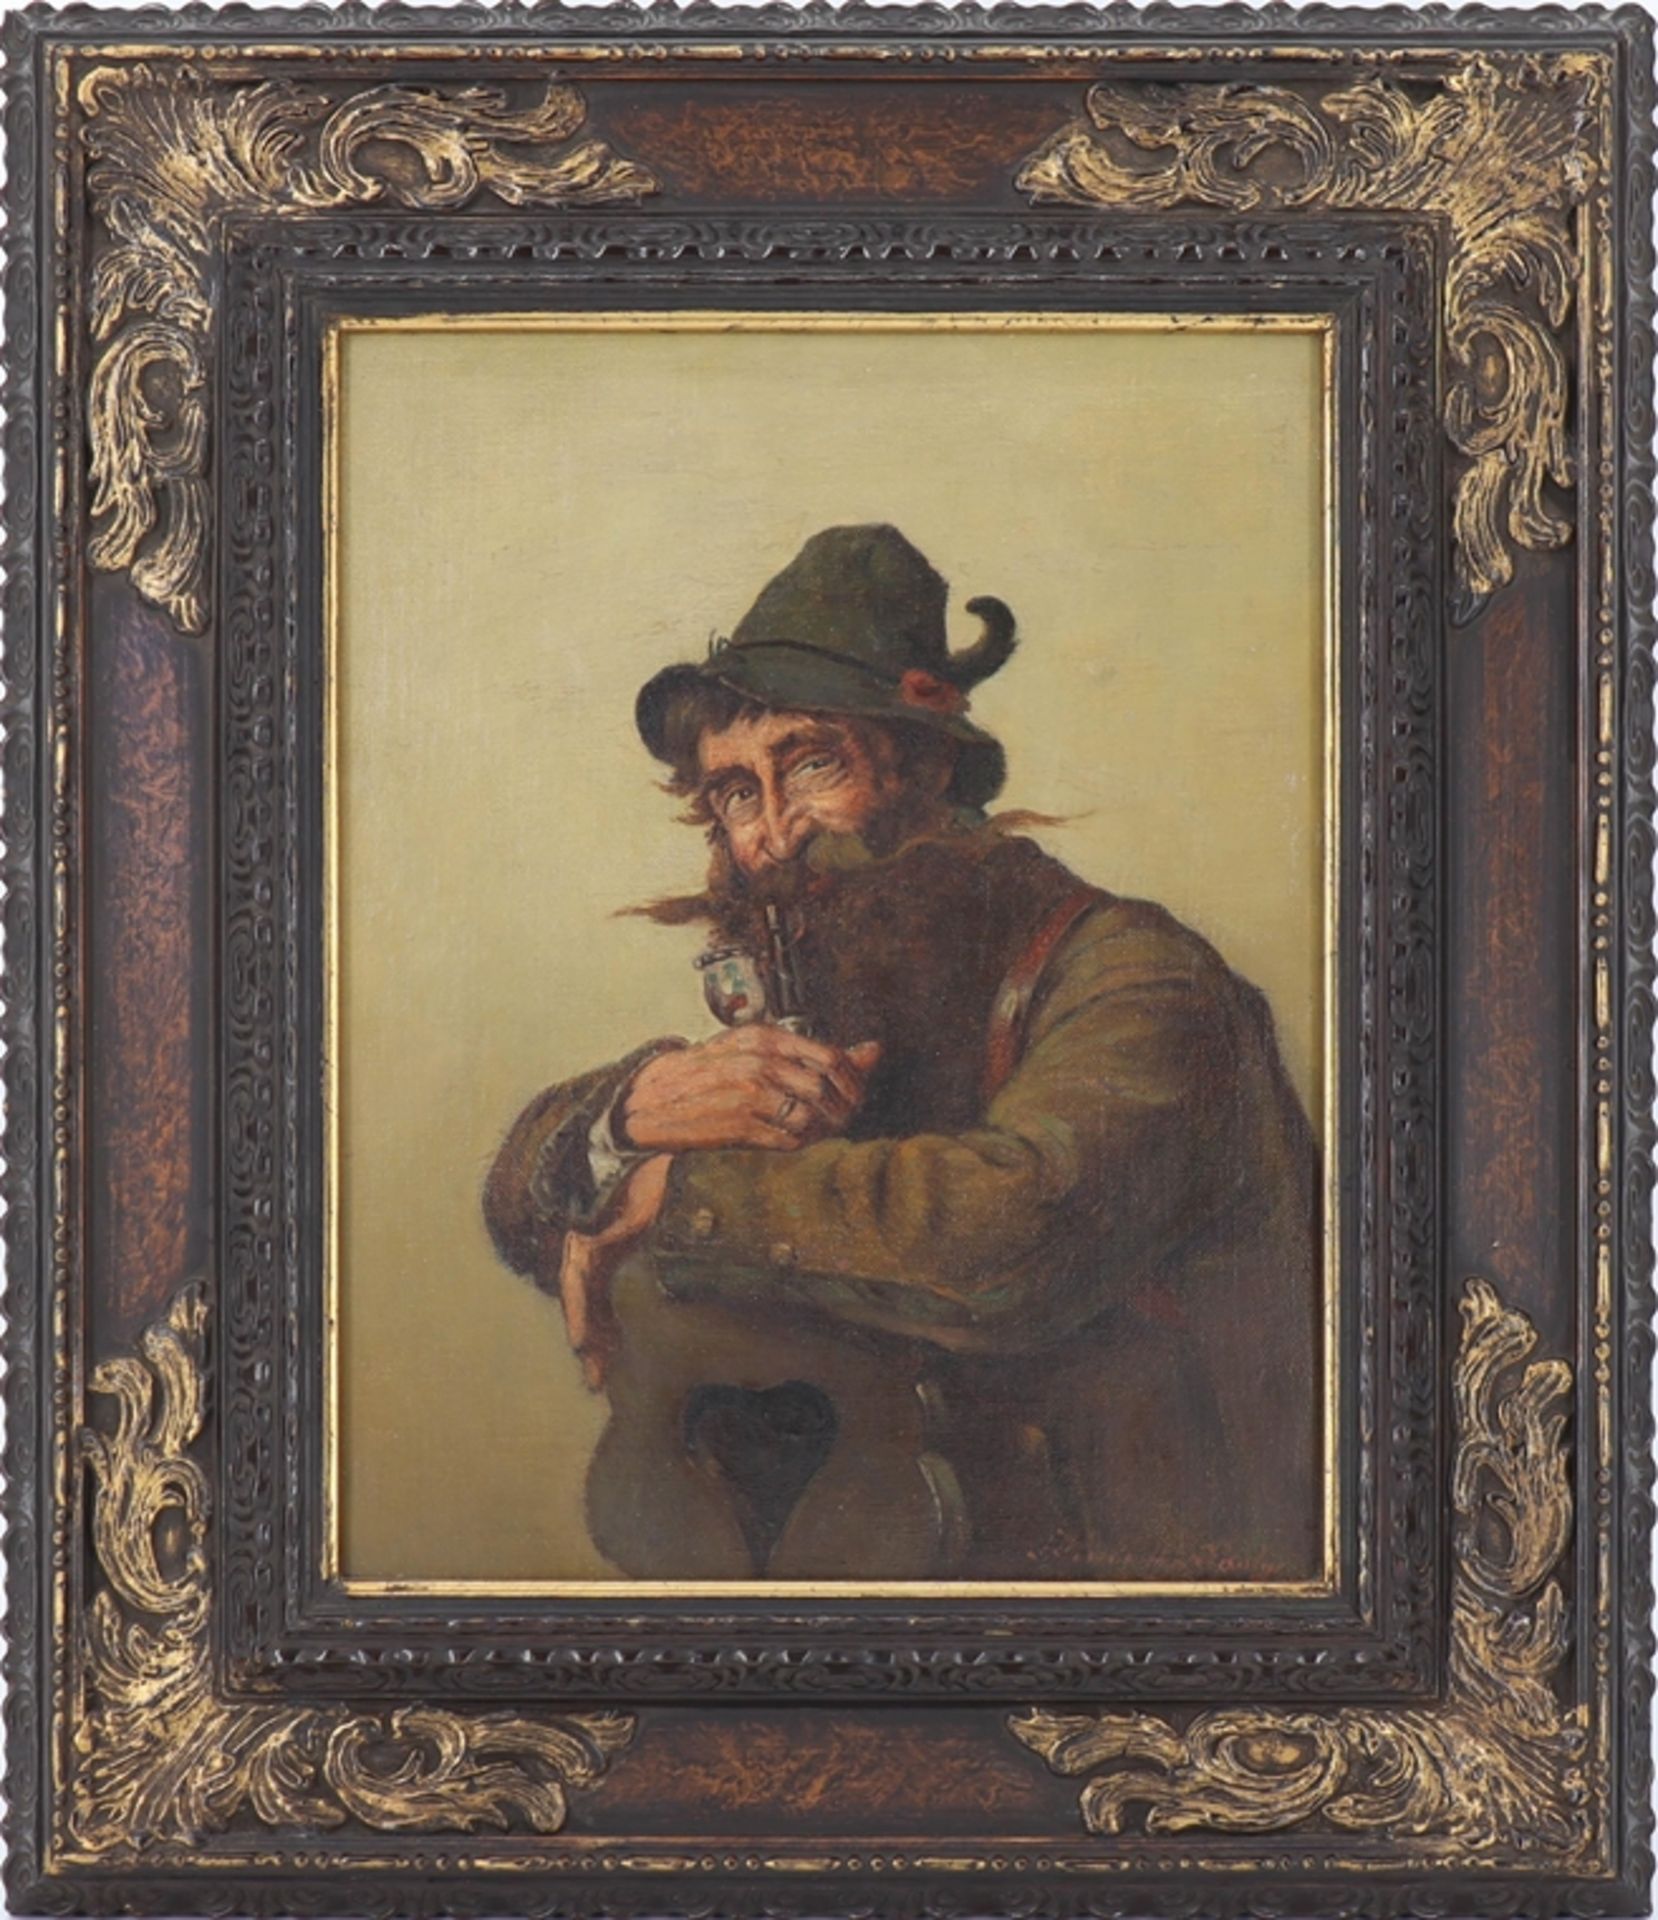 The robber journeyman, oil on canvas, illegibly signed, c. 1900 - Image 4 of 4